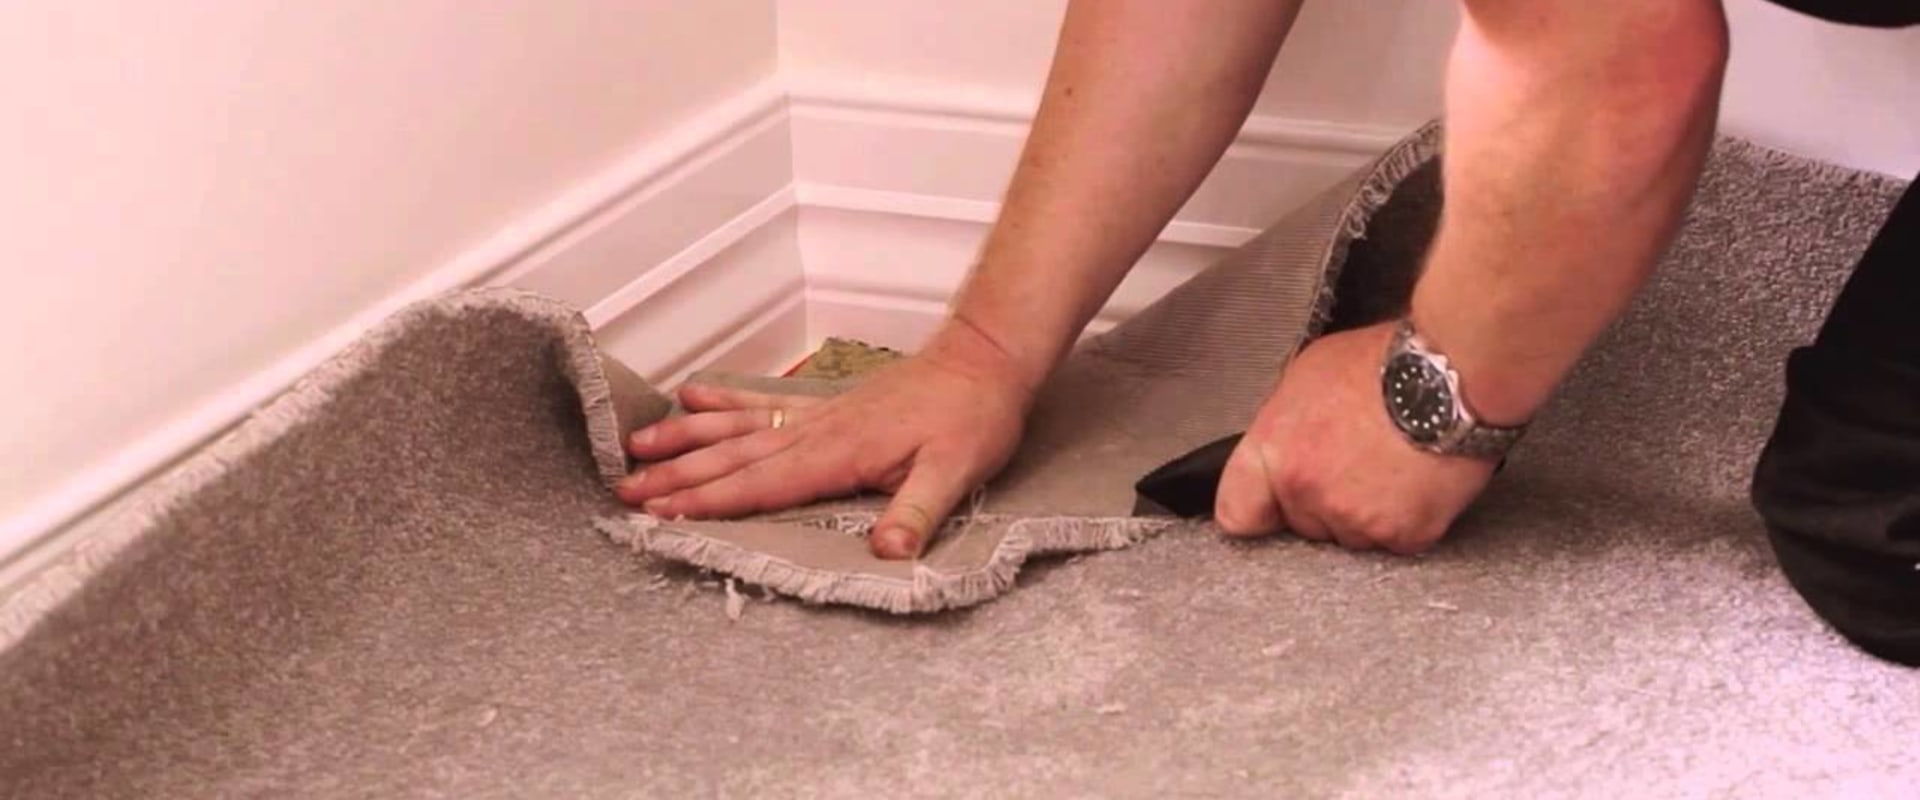 Installing Carpets: Techniques to Make it Easy